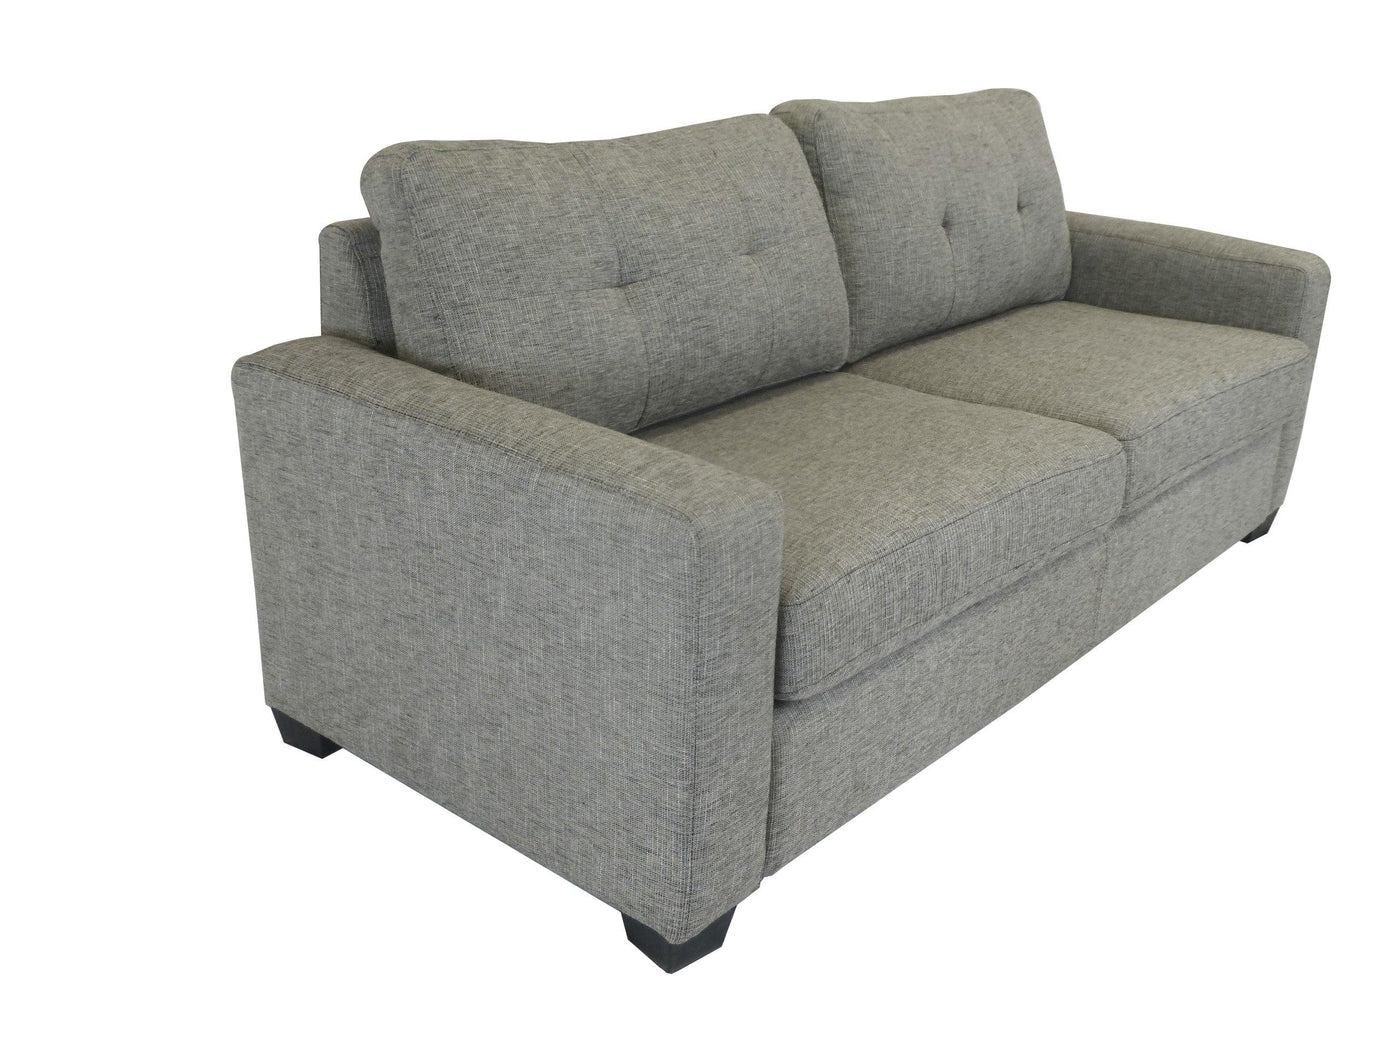 Hunter Queen Sofabed Quality Sofa